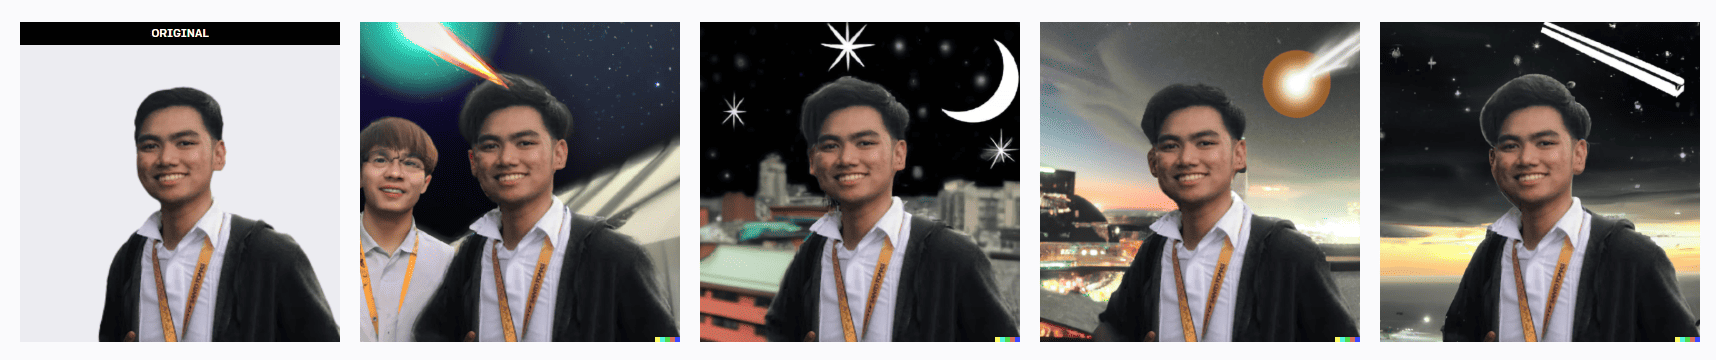 DALL-E 2 Generated Image: A student during a meteor shower.